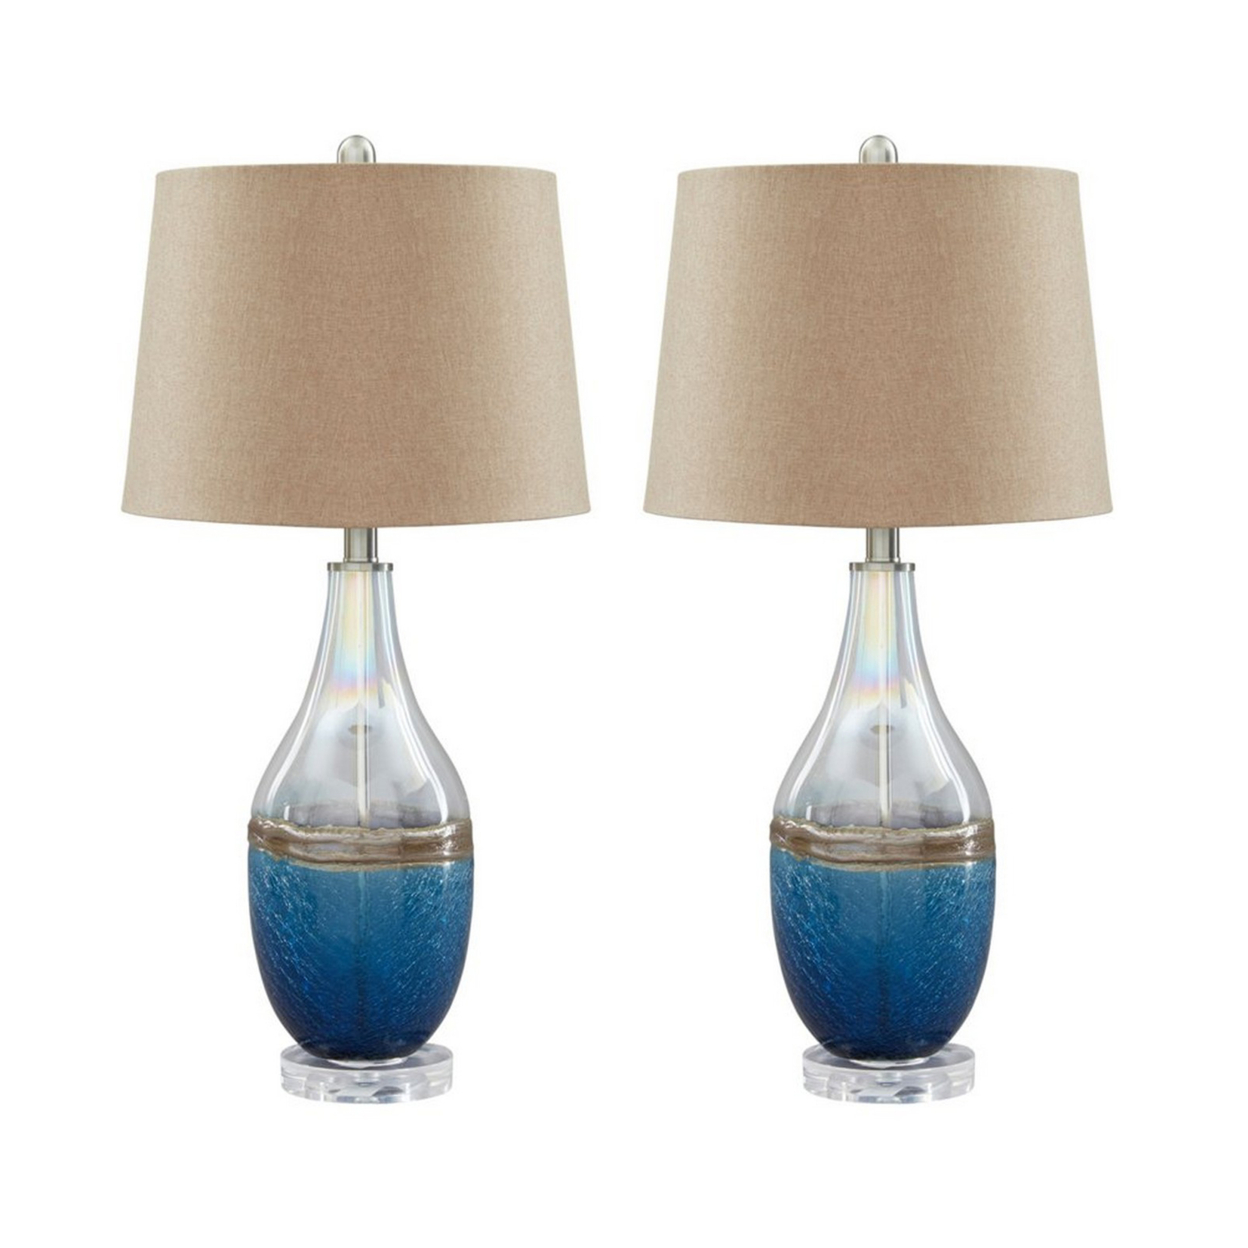 Vase Shape Frame Table Lamp With Fabric Shade, Set Of 2, Beige And Blue- Saltoro Sherpi